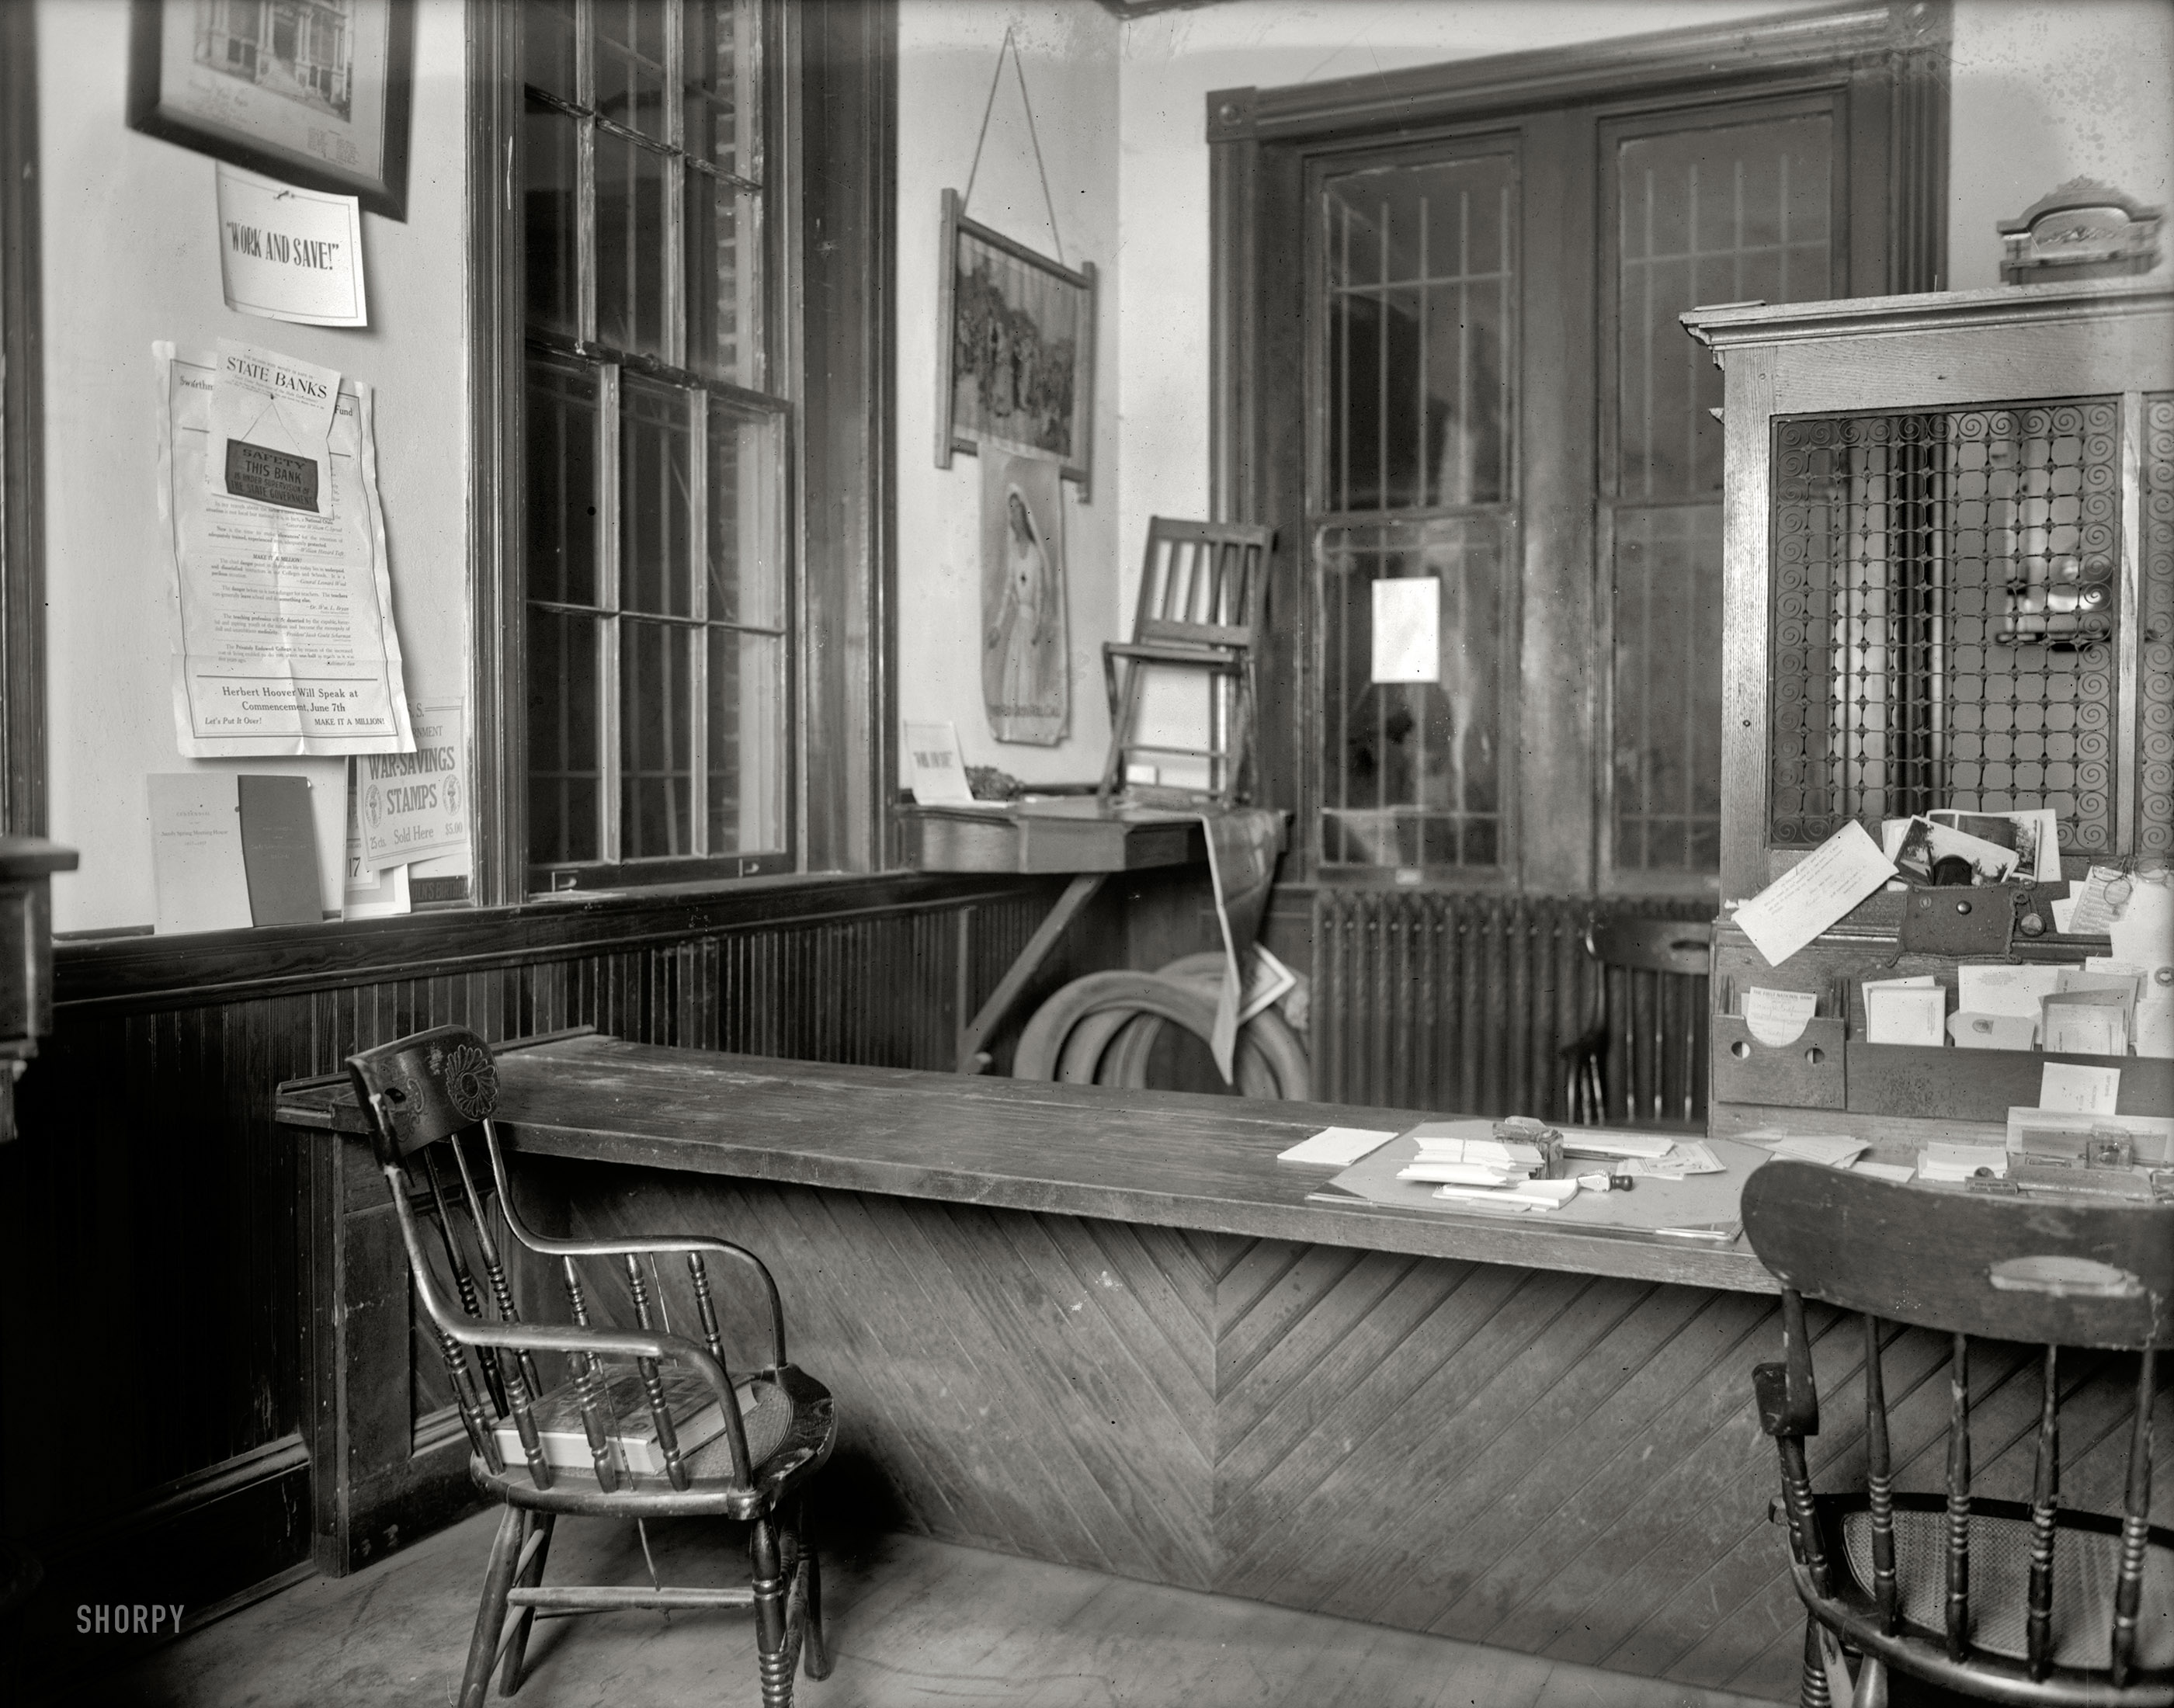 1920. Montgomery County, Maryland. "Sandy Spring Bank Robbery." The First National Bank in Sandy Spring, where on April 26, 1920, seven armed robbers killed one employee, locked the rest in the vault and made off with $5,000 in cash and securities. National Photo Company glass negative. View full size.